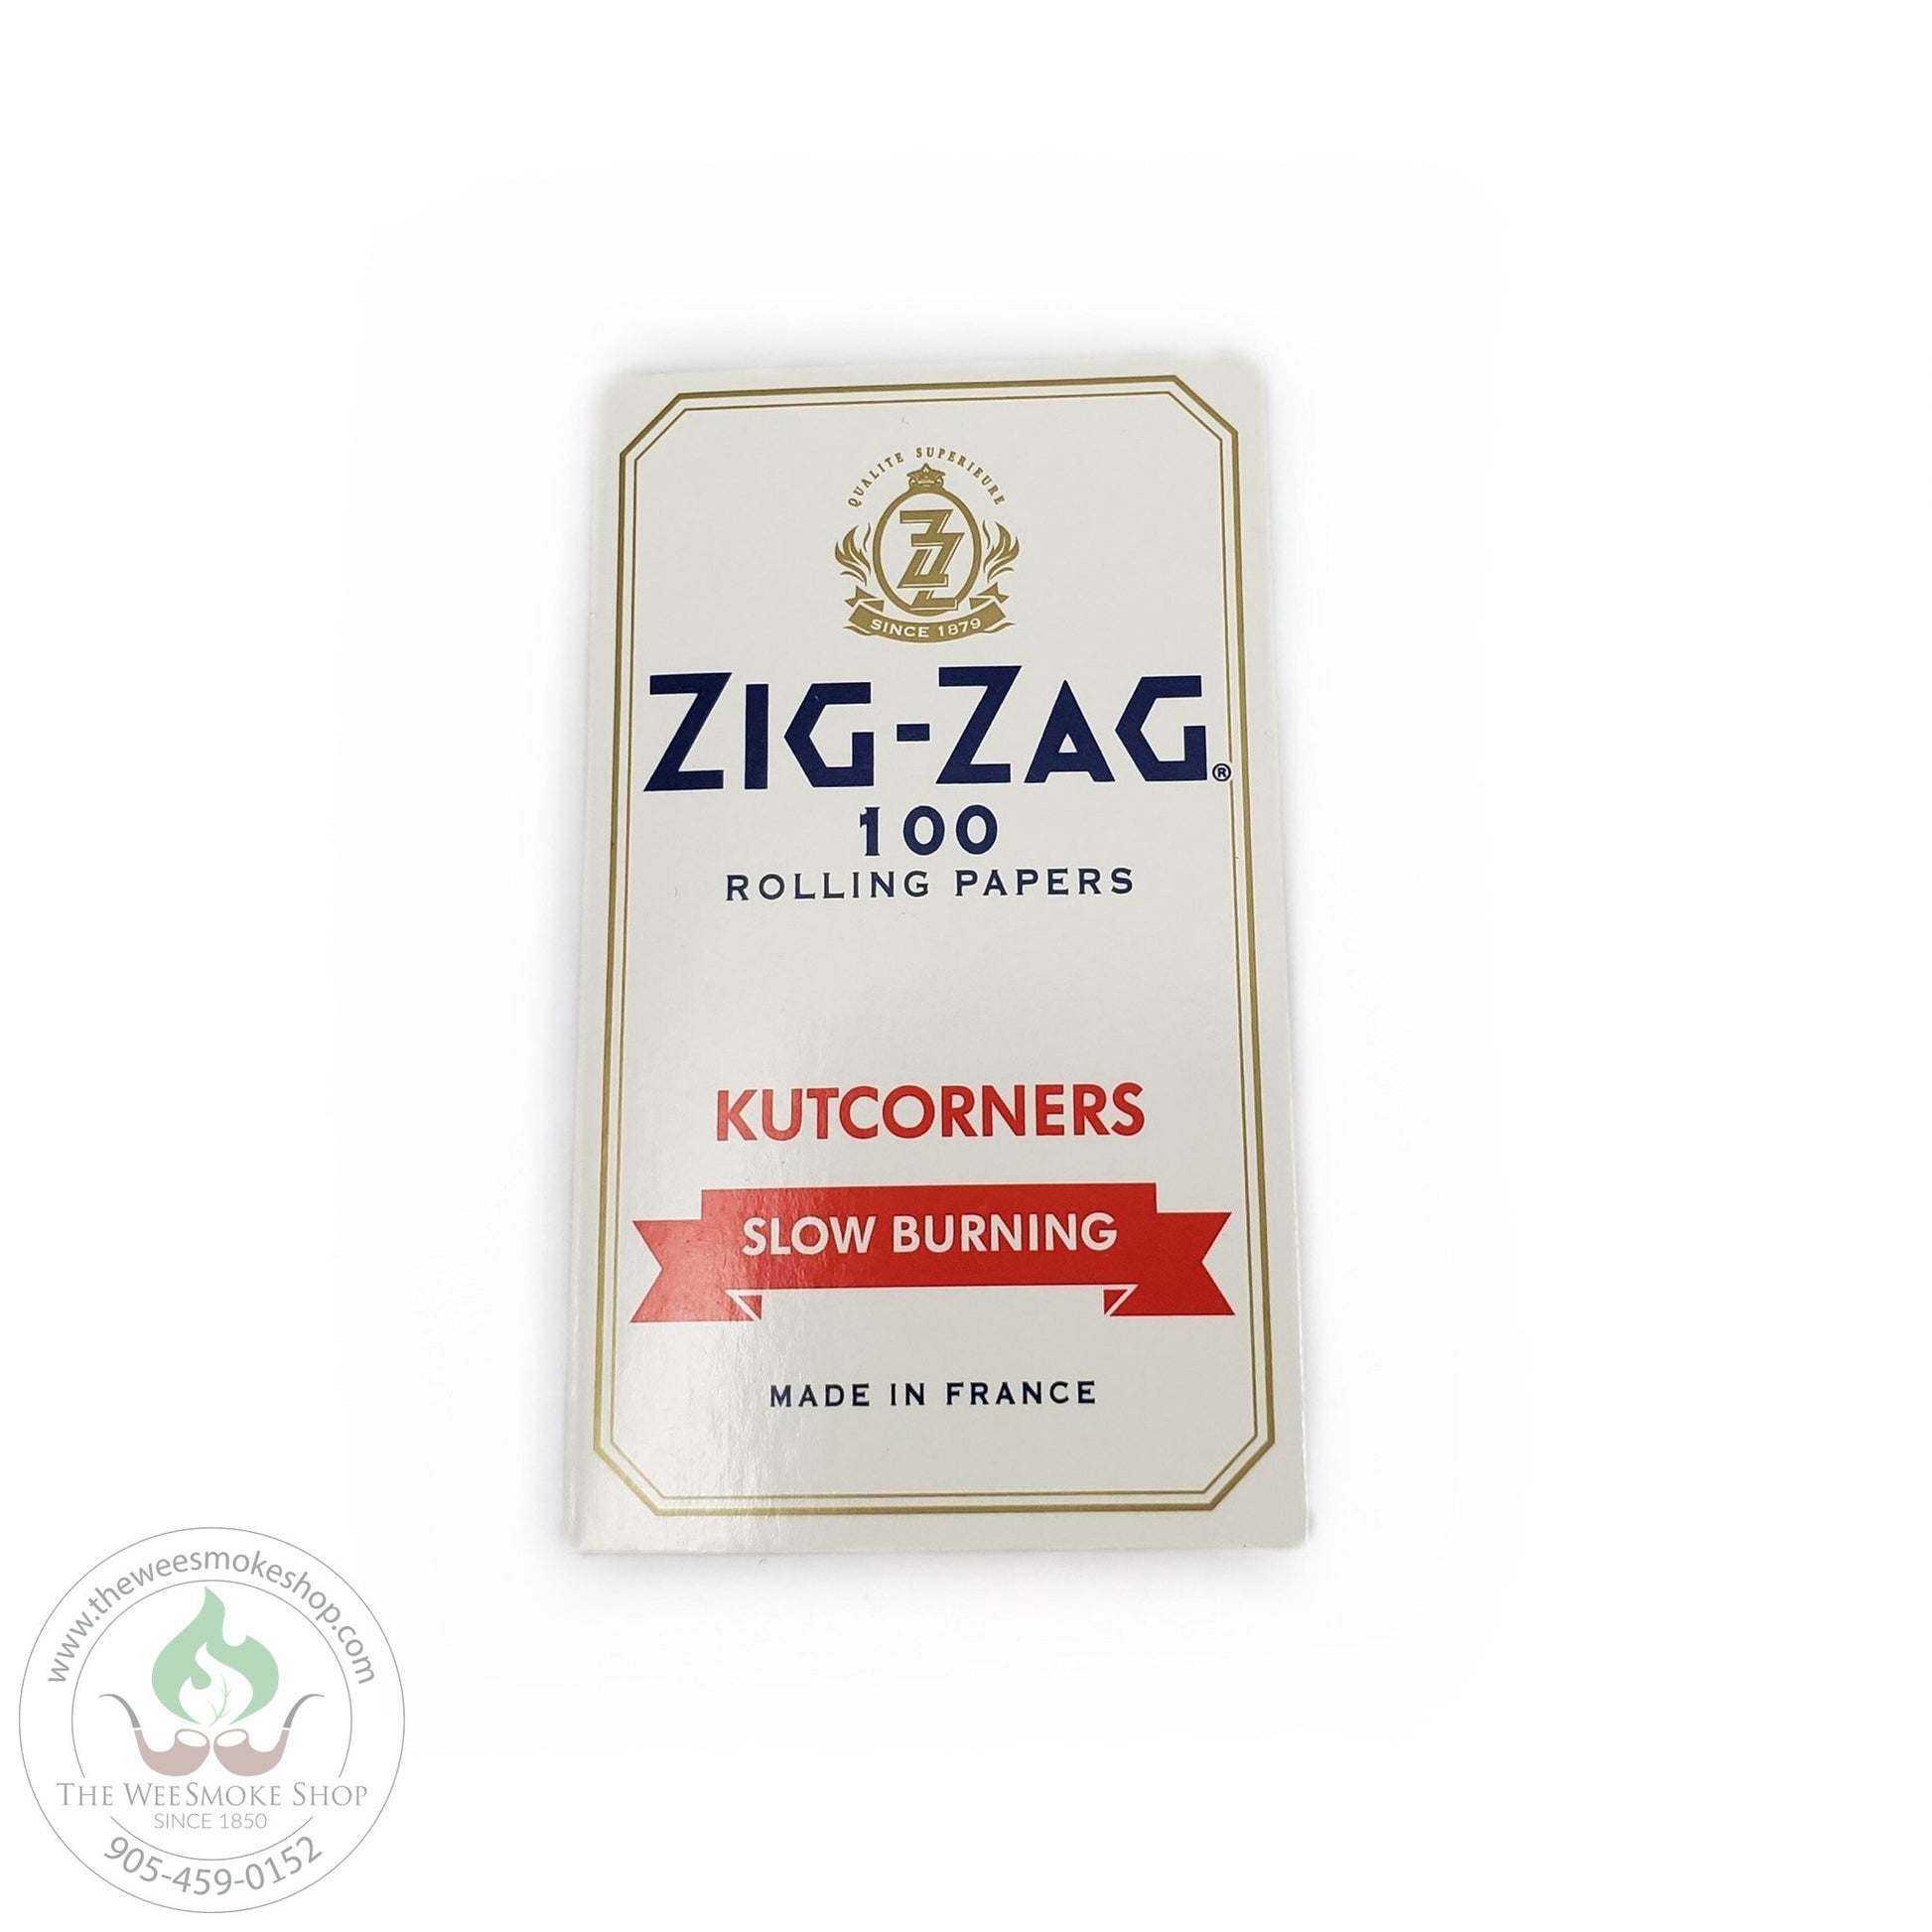 zig zag white rolling papers that are slow burning. Pack of 100 papers